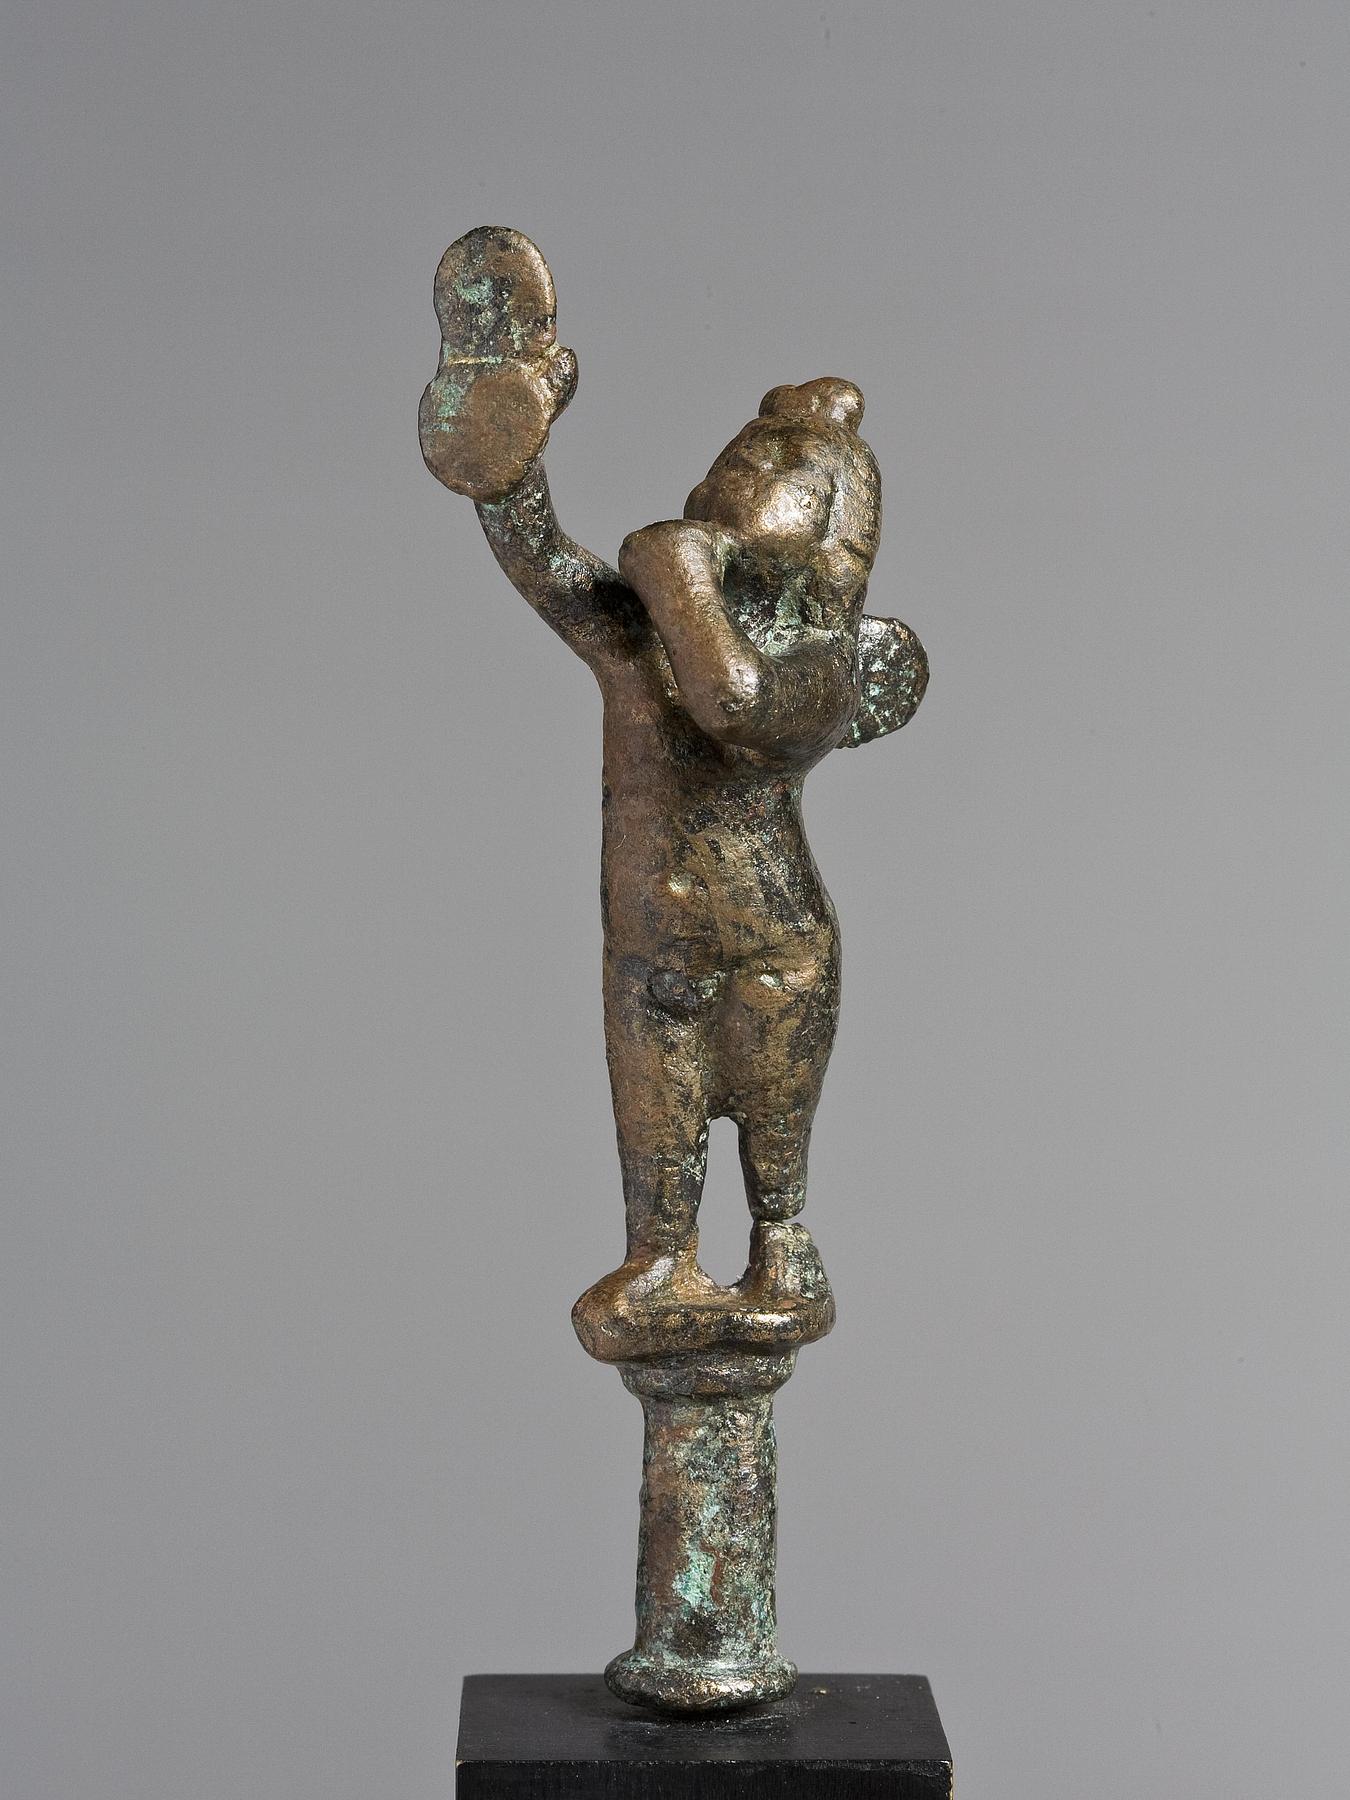 Statuette of Cupid holding a mirror, H2055